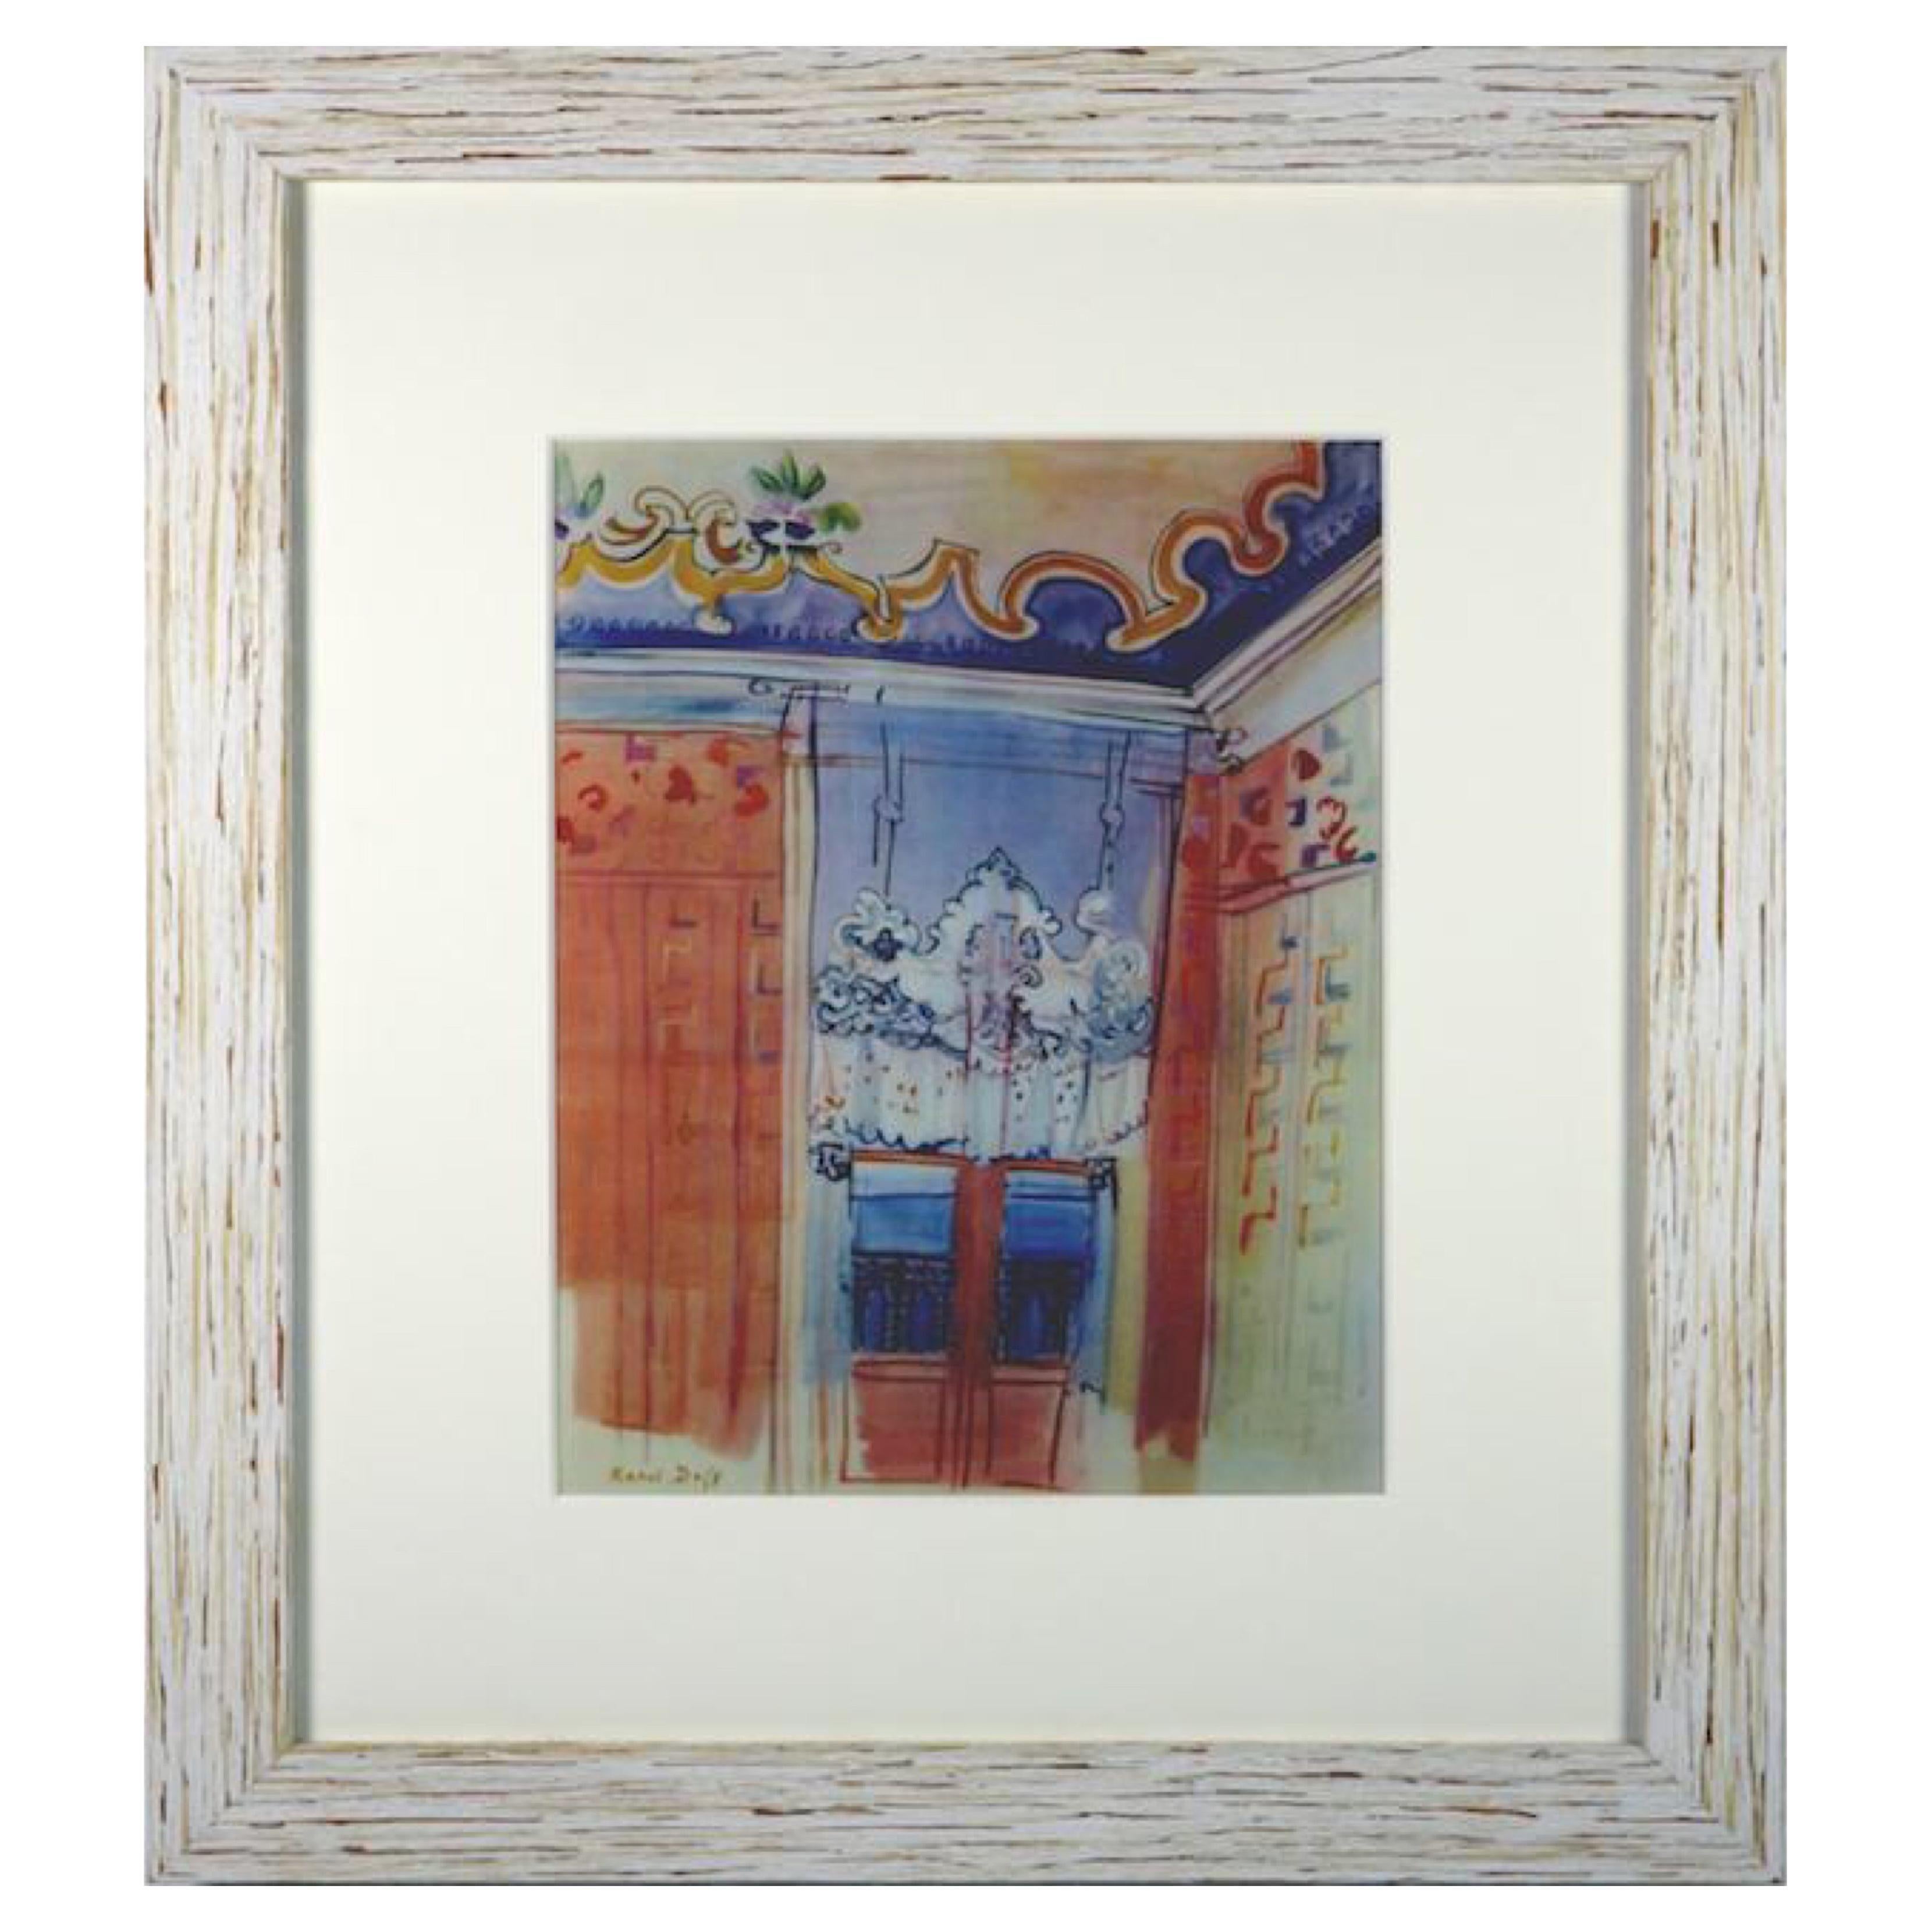 Raoul Dufy Interior at Nice Lithograph, 1960er Jahre im Angebot